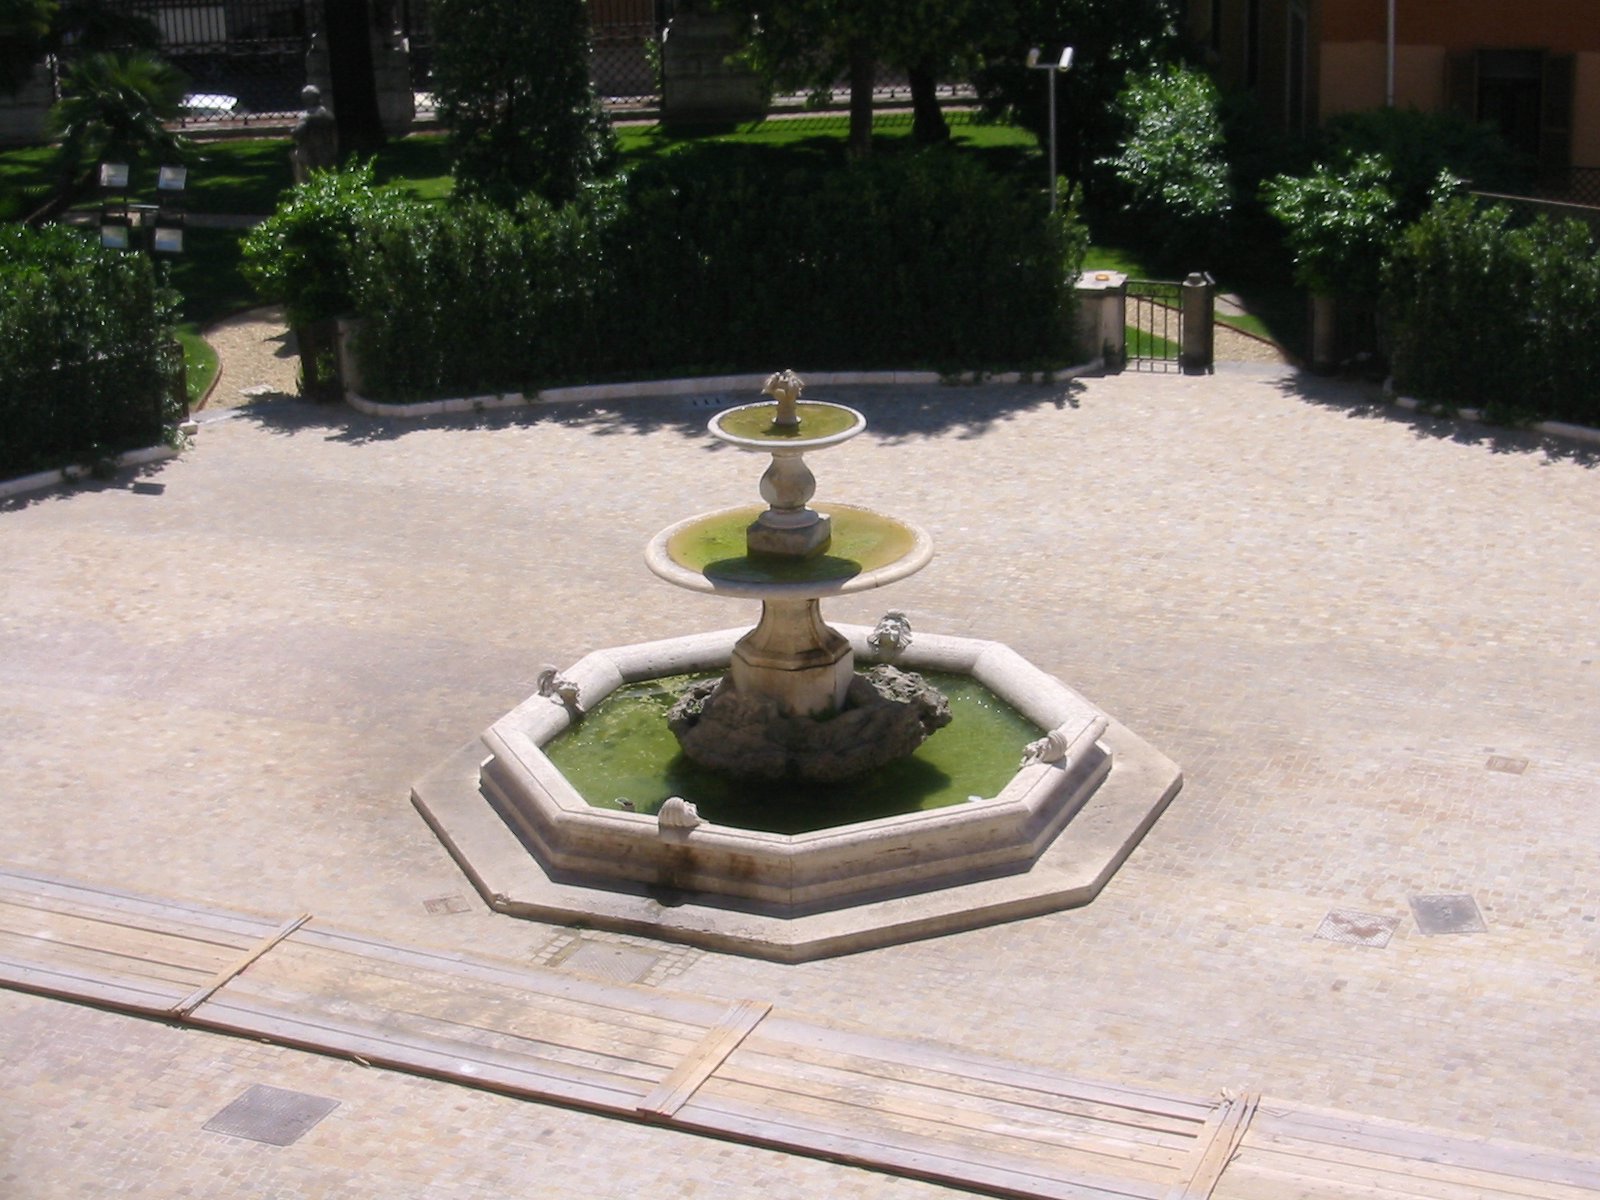 an aerial view of a water fountain surrounded by hedges and trees